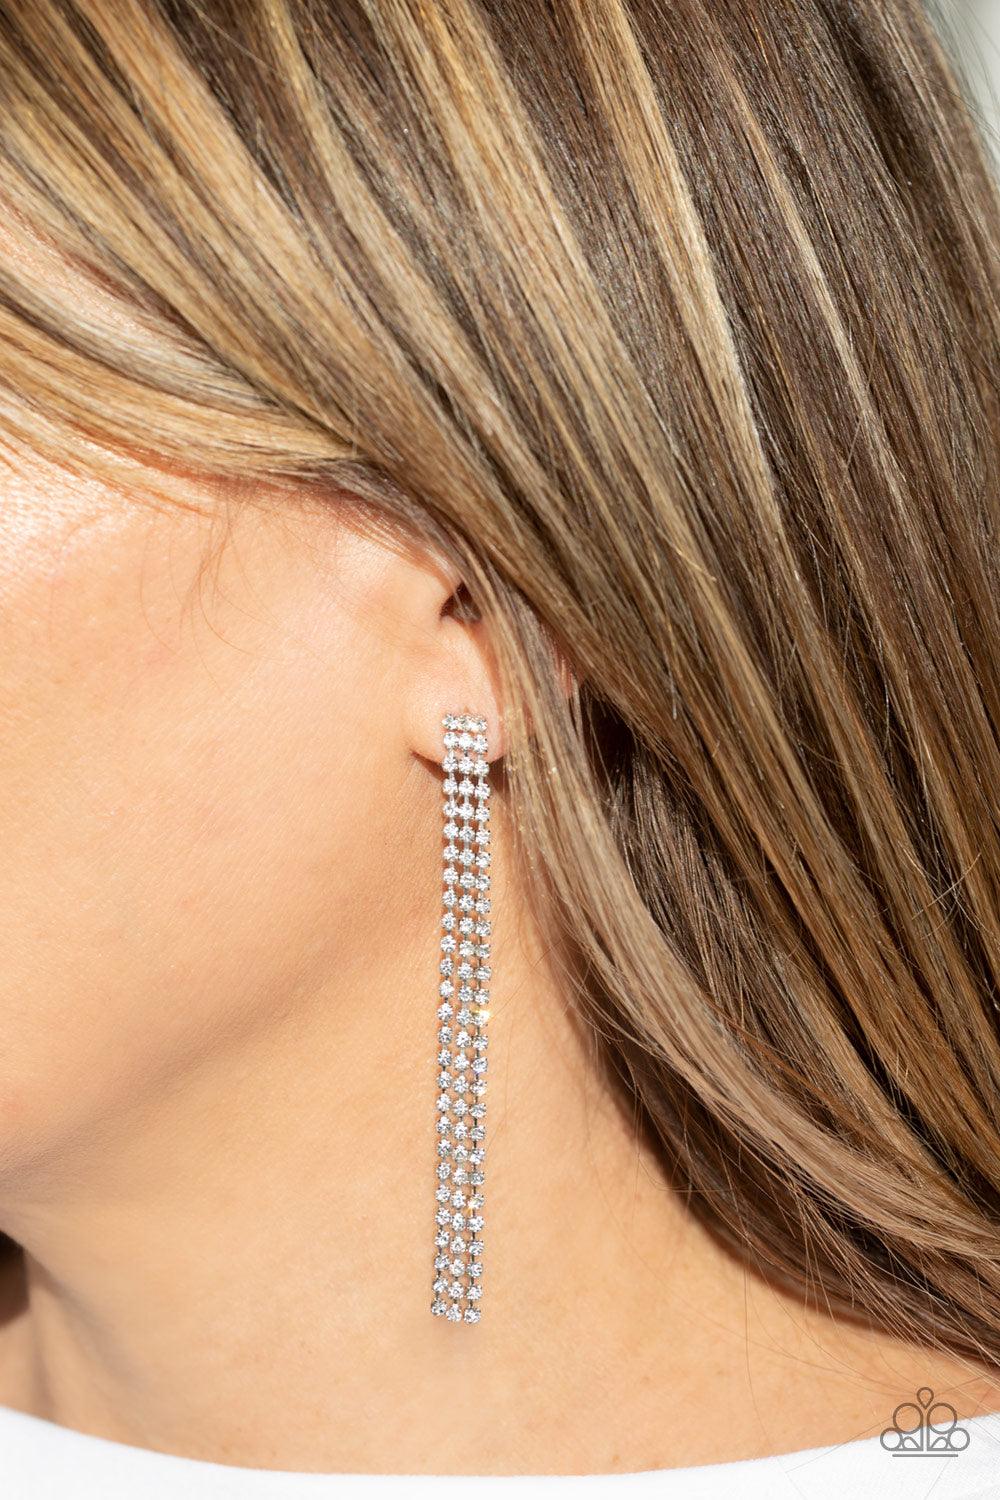 Paparazzi Accessories Stellar Starlight - White Three strands of glittery white rhinestones free-fall from the ear, coalescing into a timeless chandelier. Earring attaches to a standard post fitting. Sold as one pair of post earrings. Jewelry